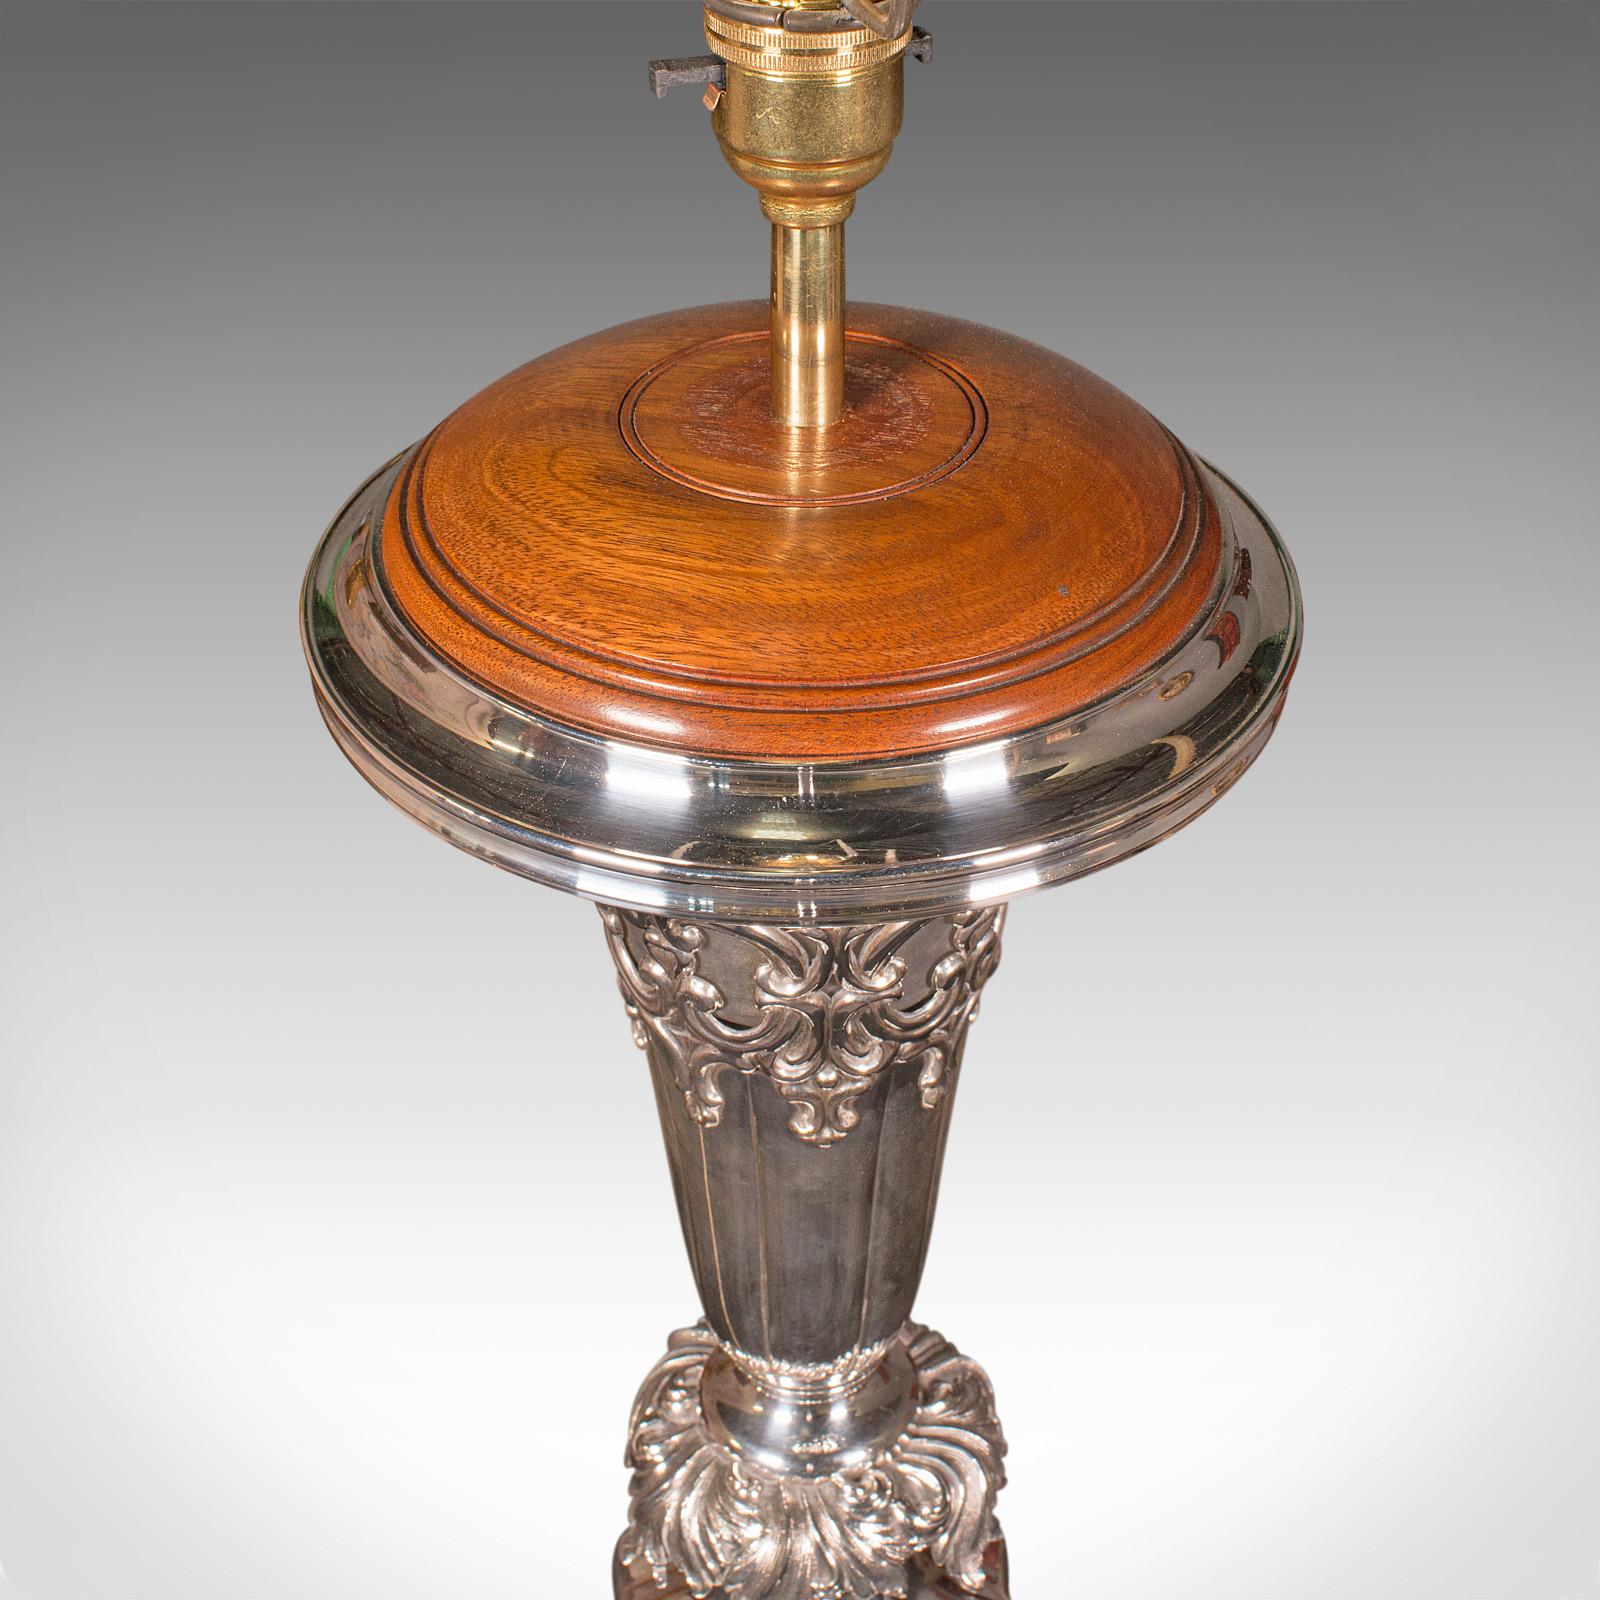 19th Century Large Antique Table Lamp, English Silver Plate, Walnut, Light, Victorian, C.1900 For Sale